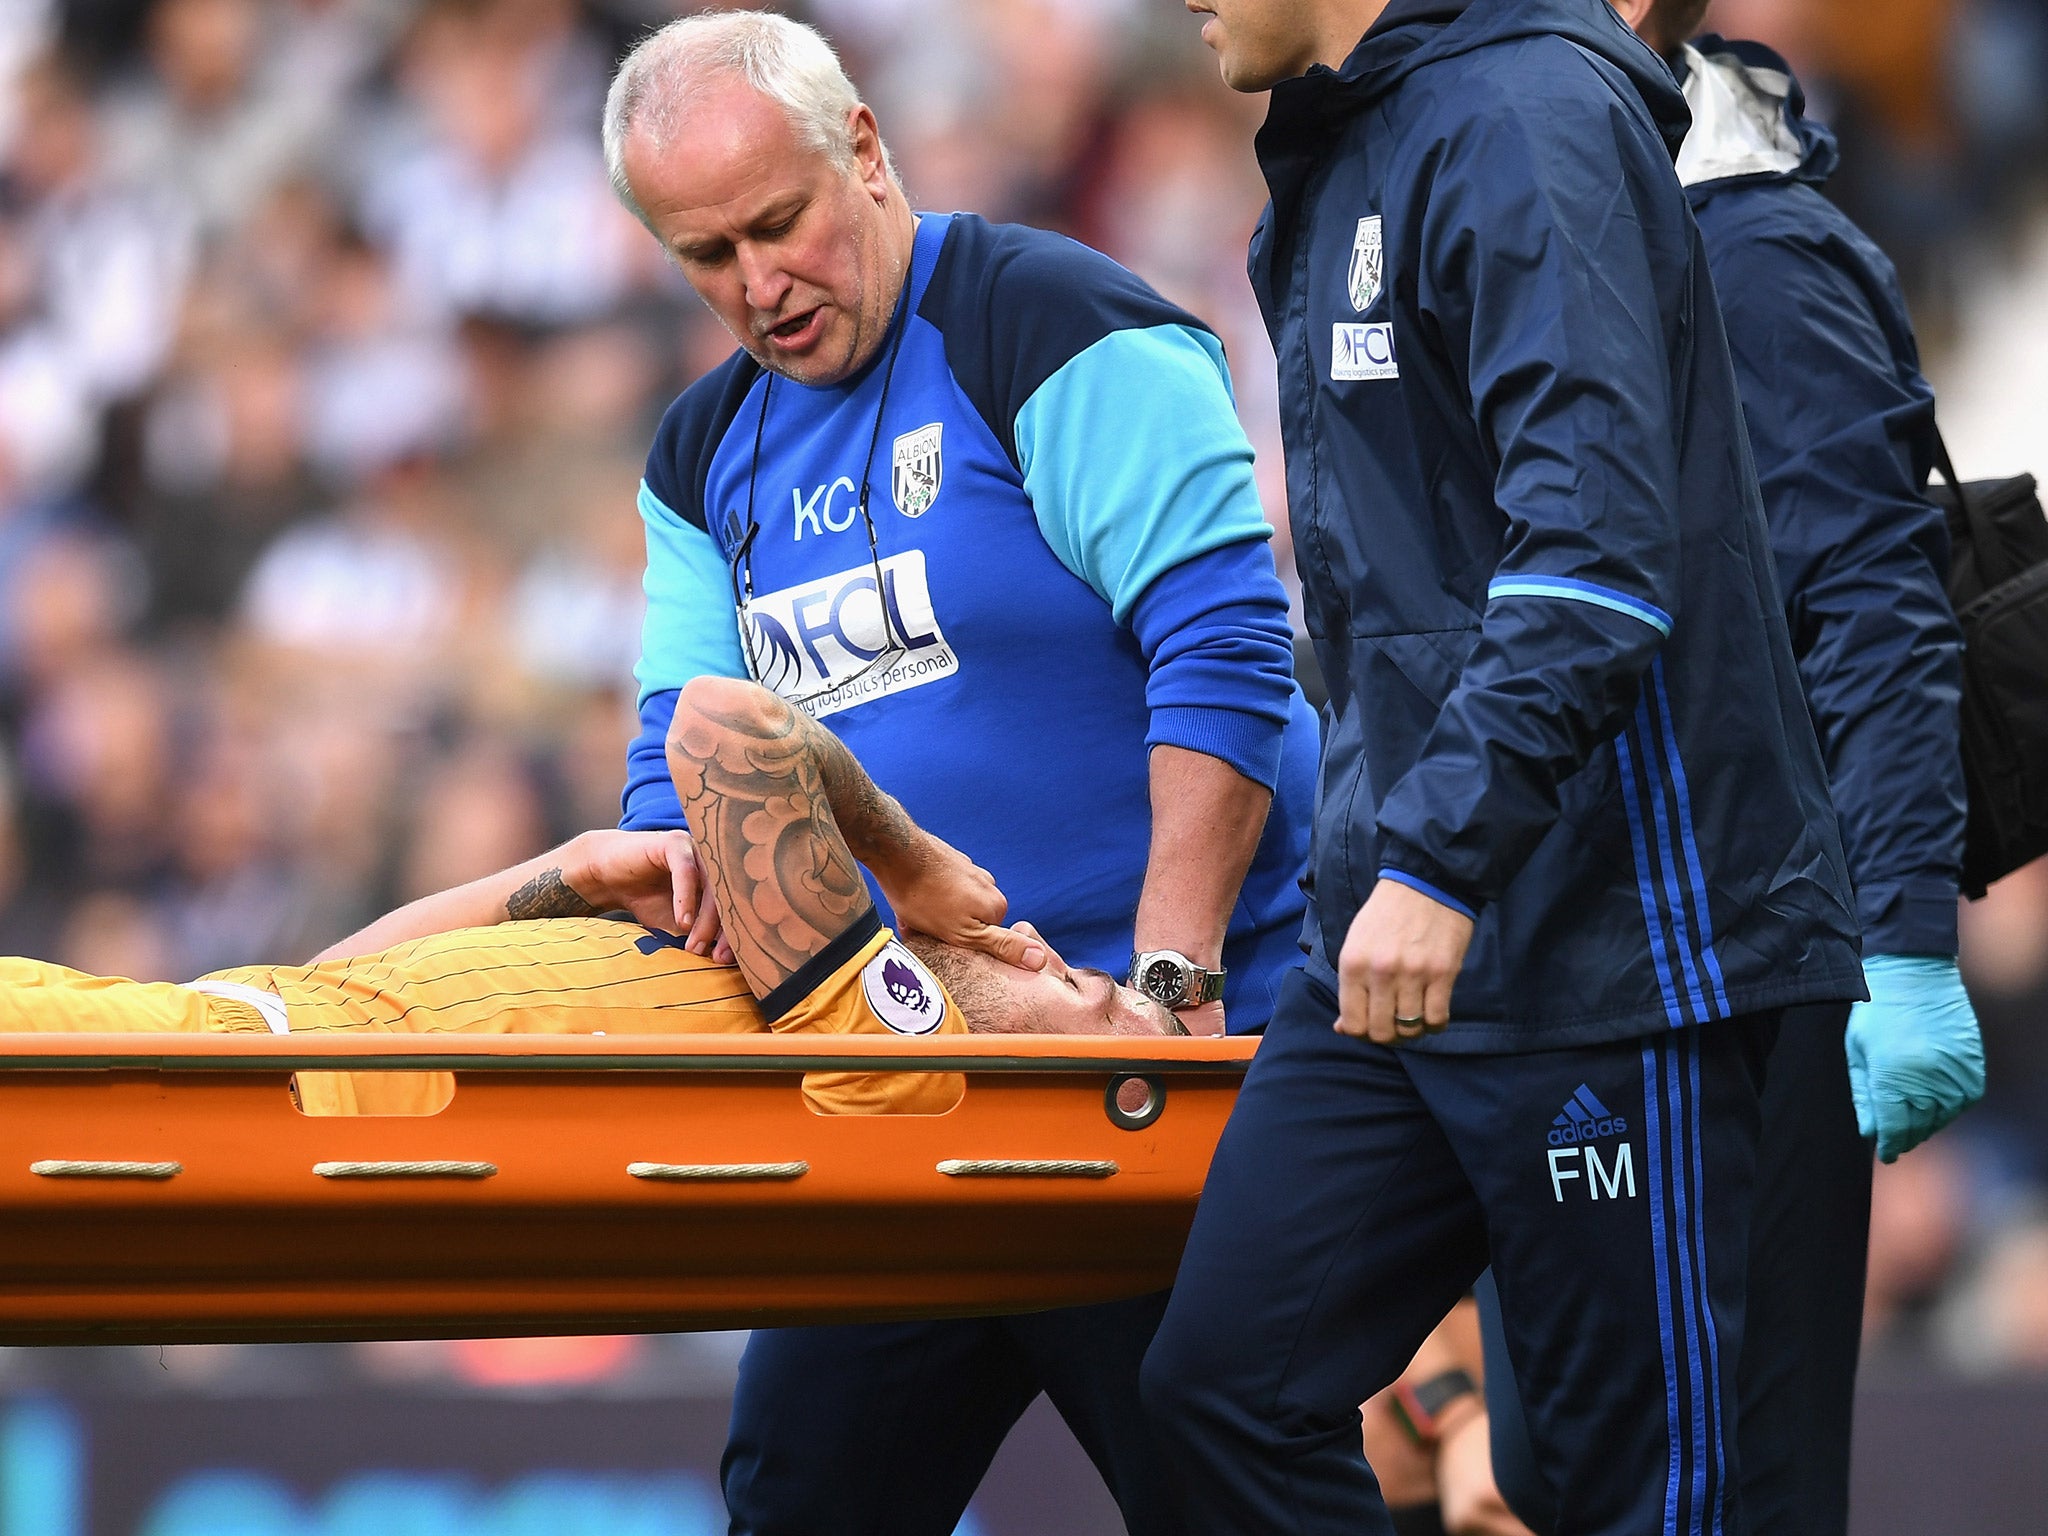 Toby Alderweireld is carried off the field on a stretcher after suffering leg and knee injuries